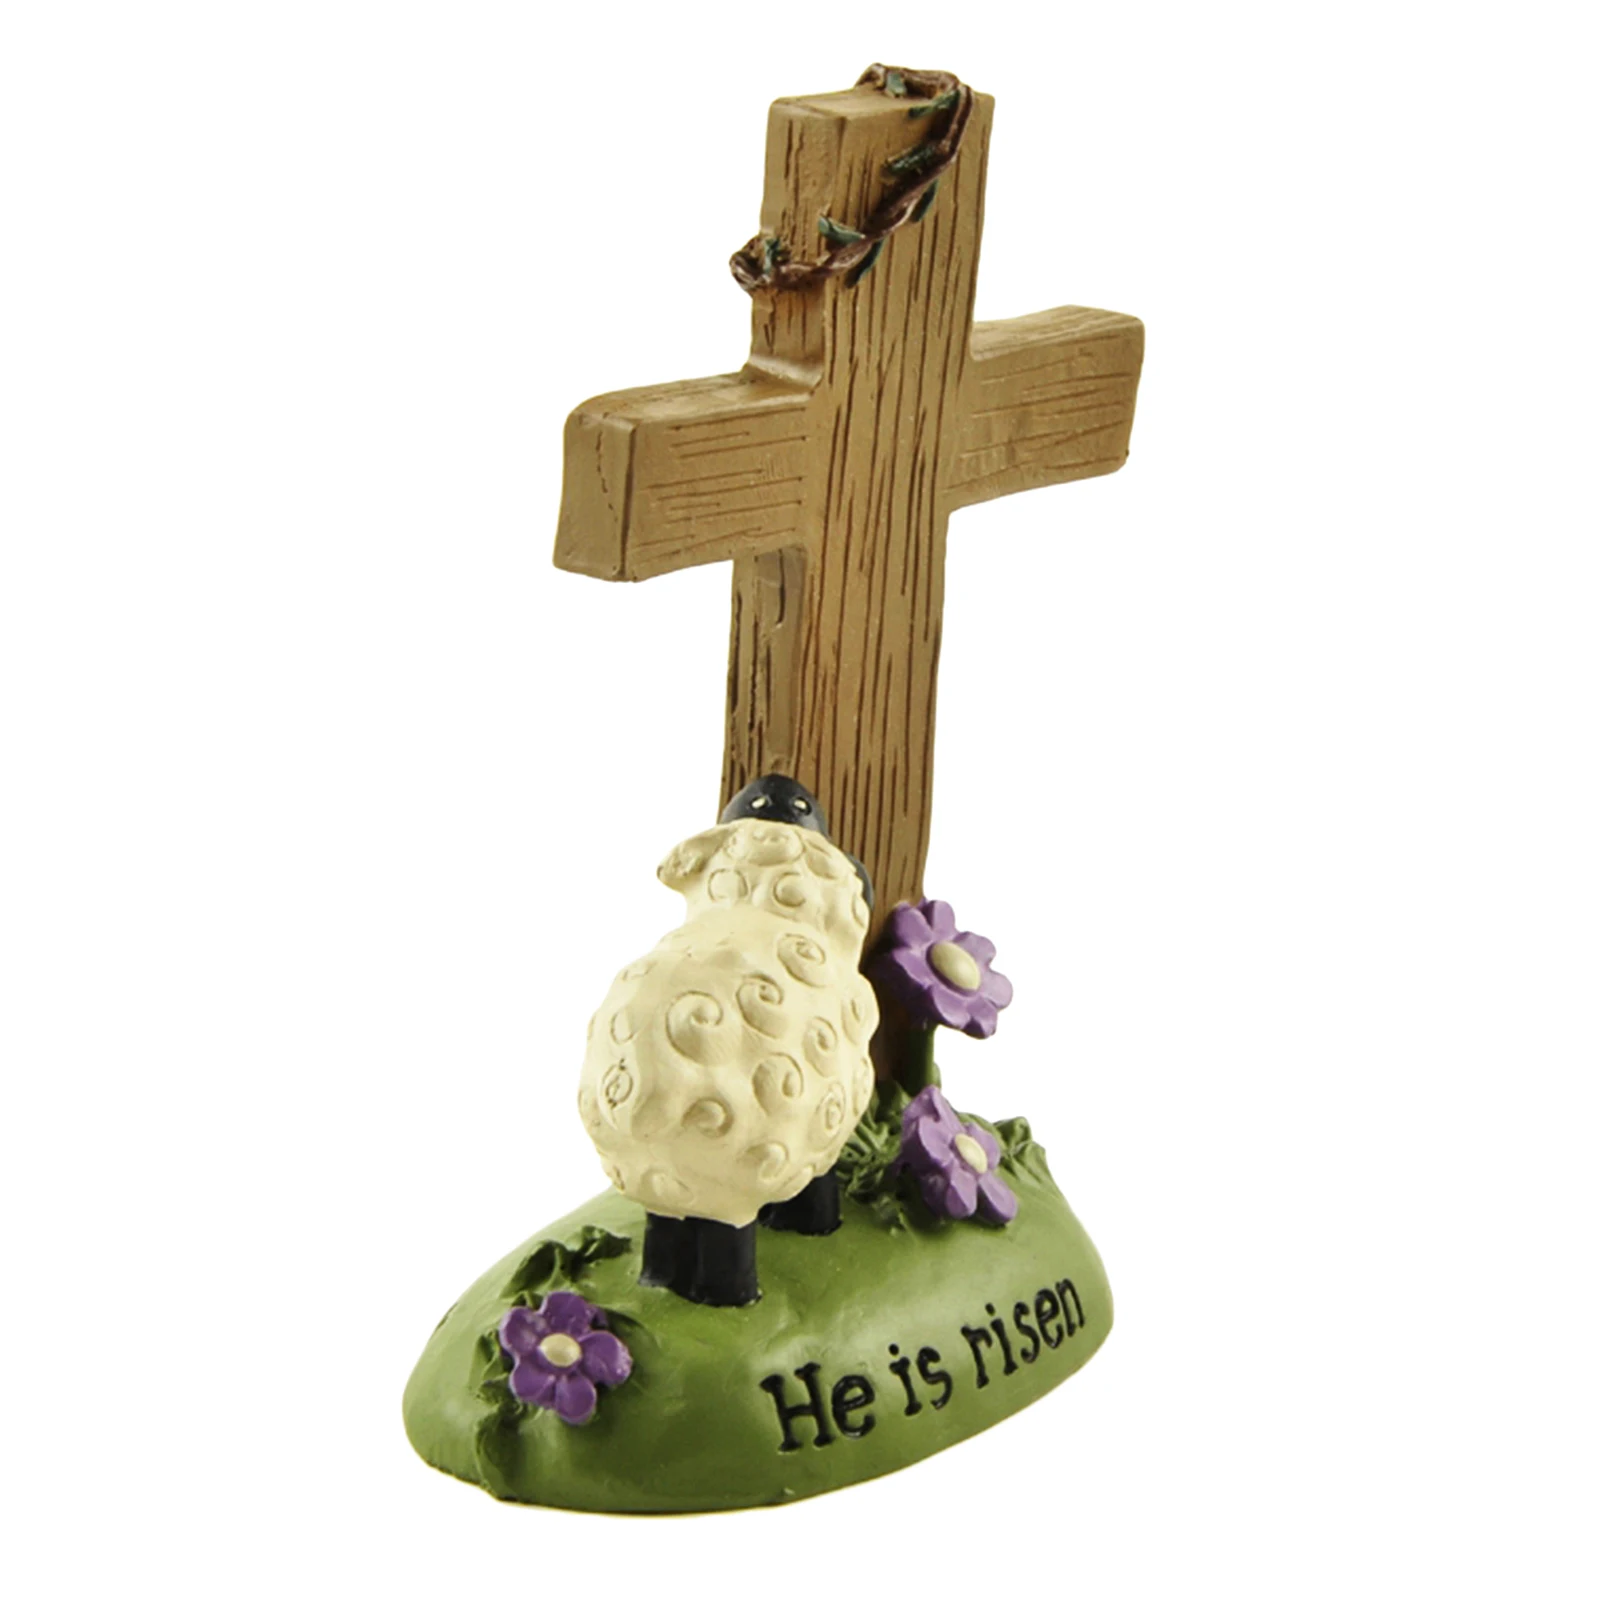 Resin Church Cross Decorative Ornaments Cross Decor Christian Gift Handcrafted Resin for Belivers